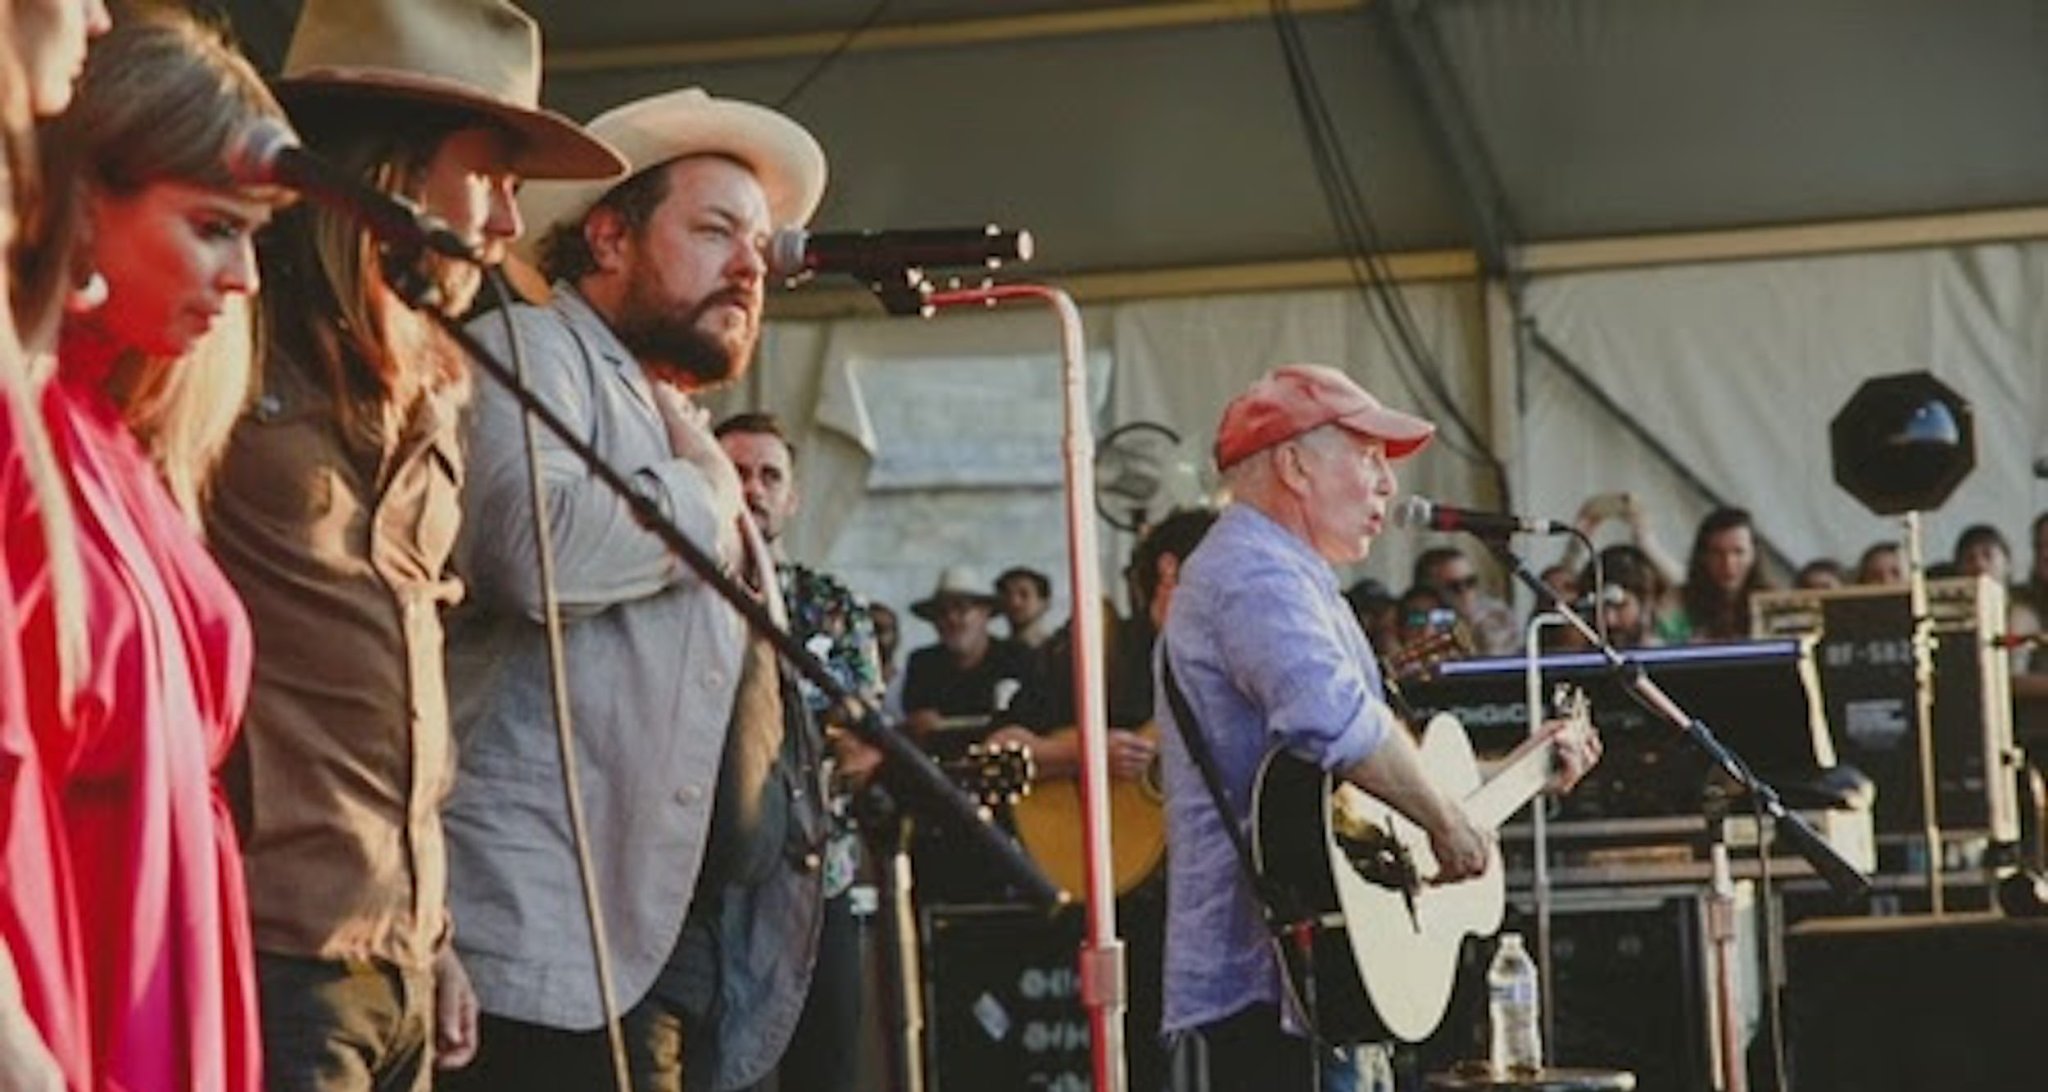 Watch Paul Simon Play Newport Folk Festival For First Time During Nathaniel Rateliff's Set